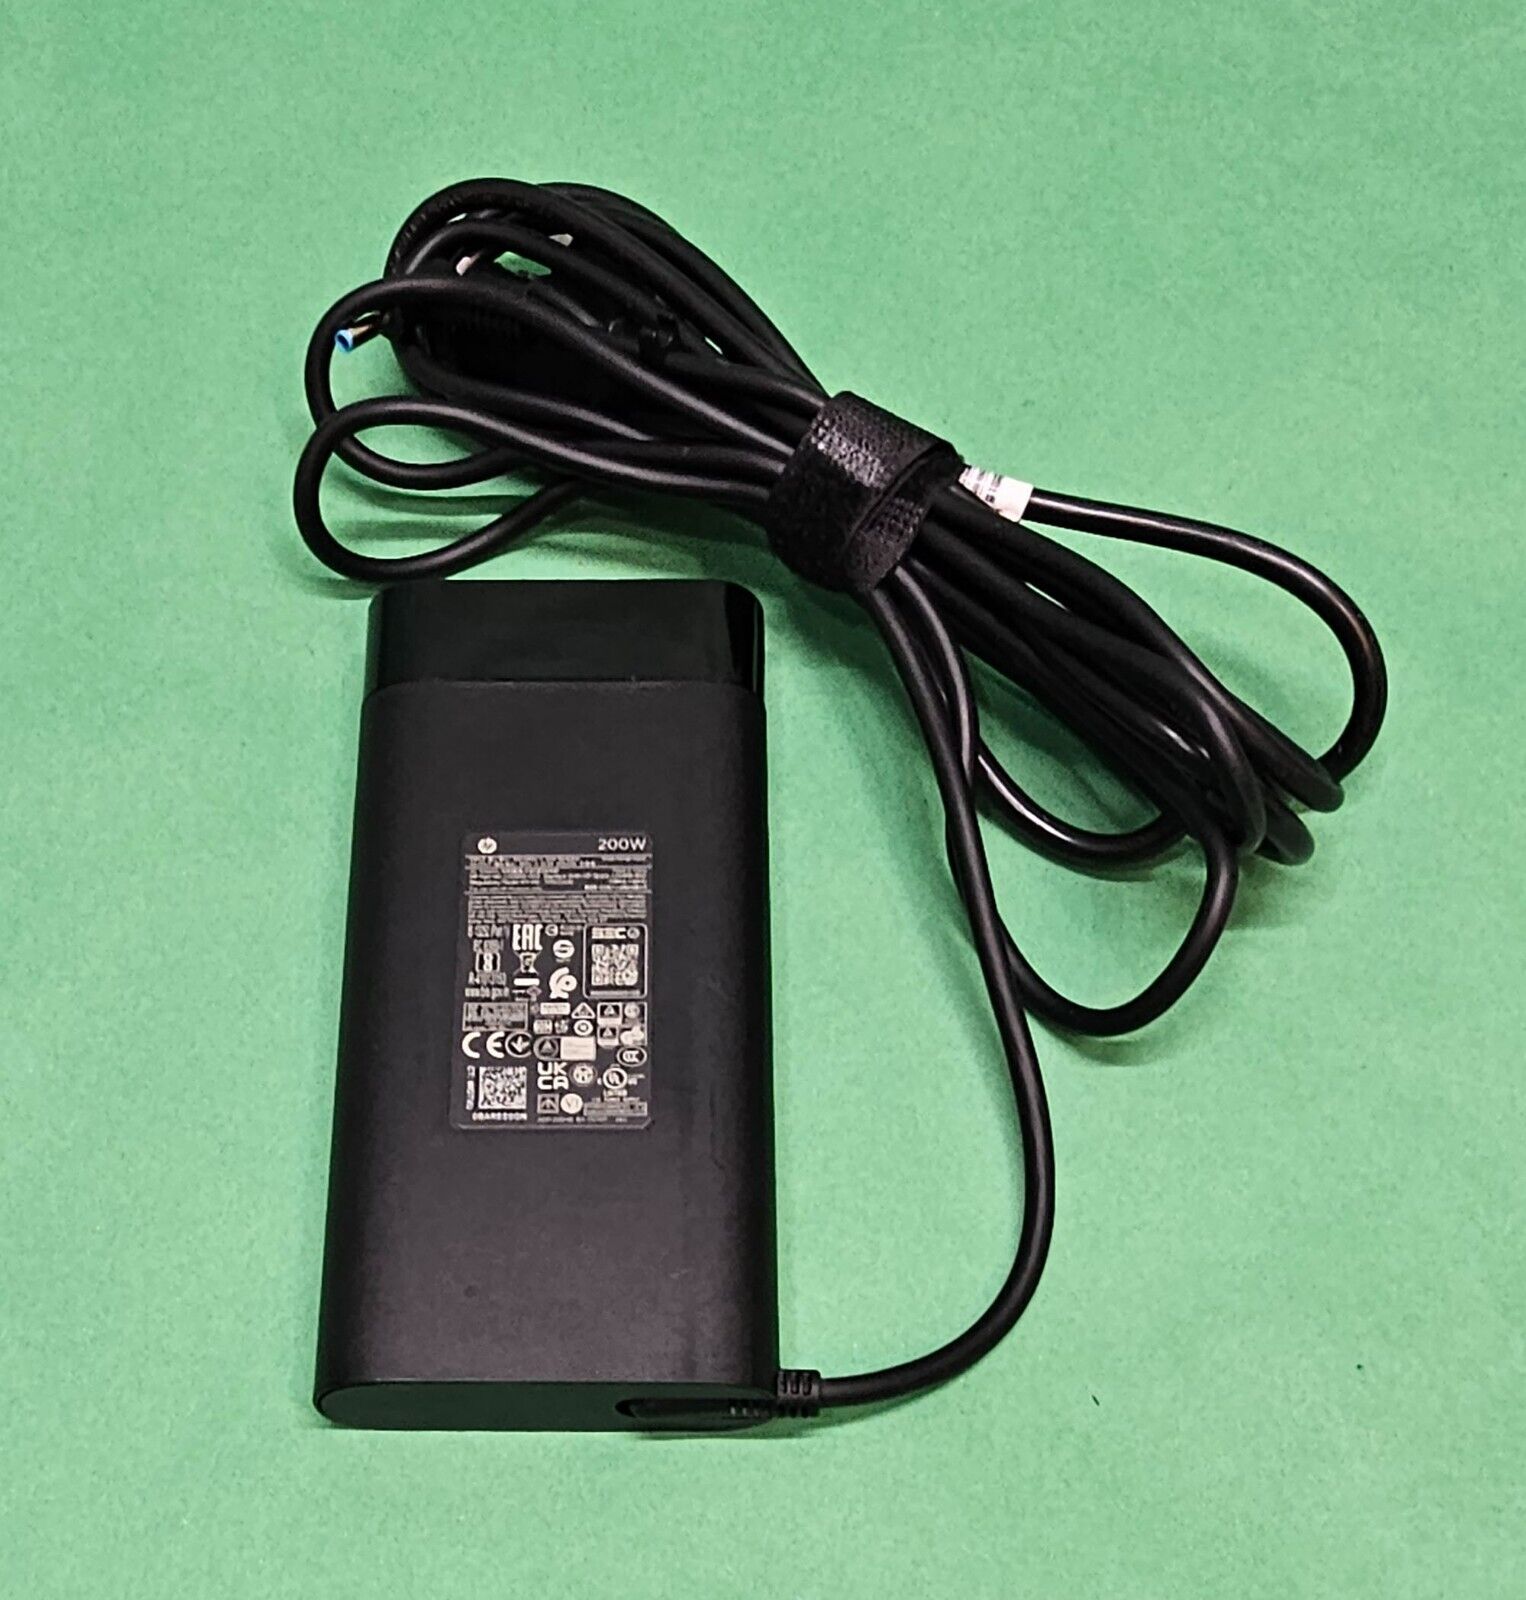 Genuine HP Laptop Power Adapter Charger 19.5V 10.3A 200W M31368-002 L00818-850